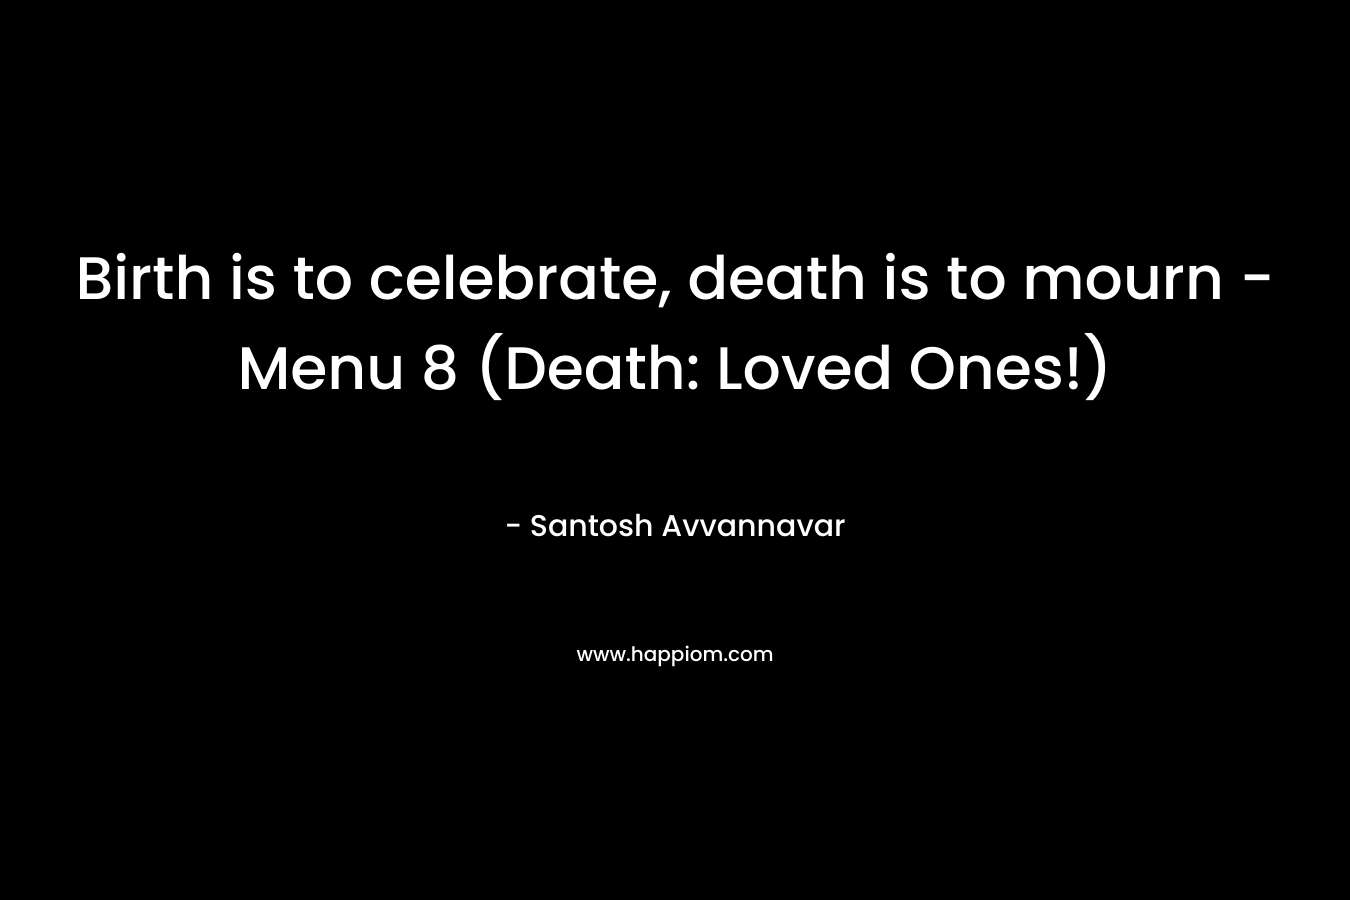 Birth is to celebrate, death is to mourn - Menu 8 (Death: Loved Ones!)